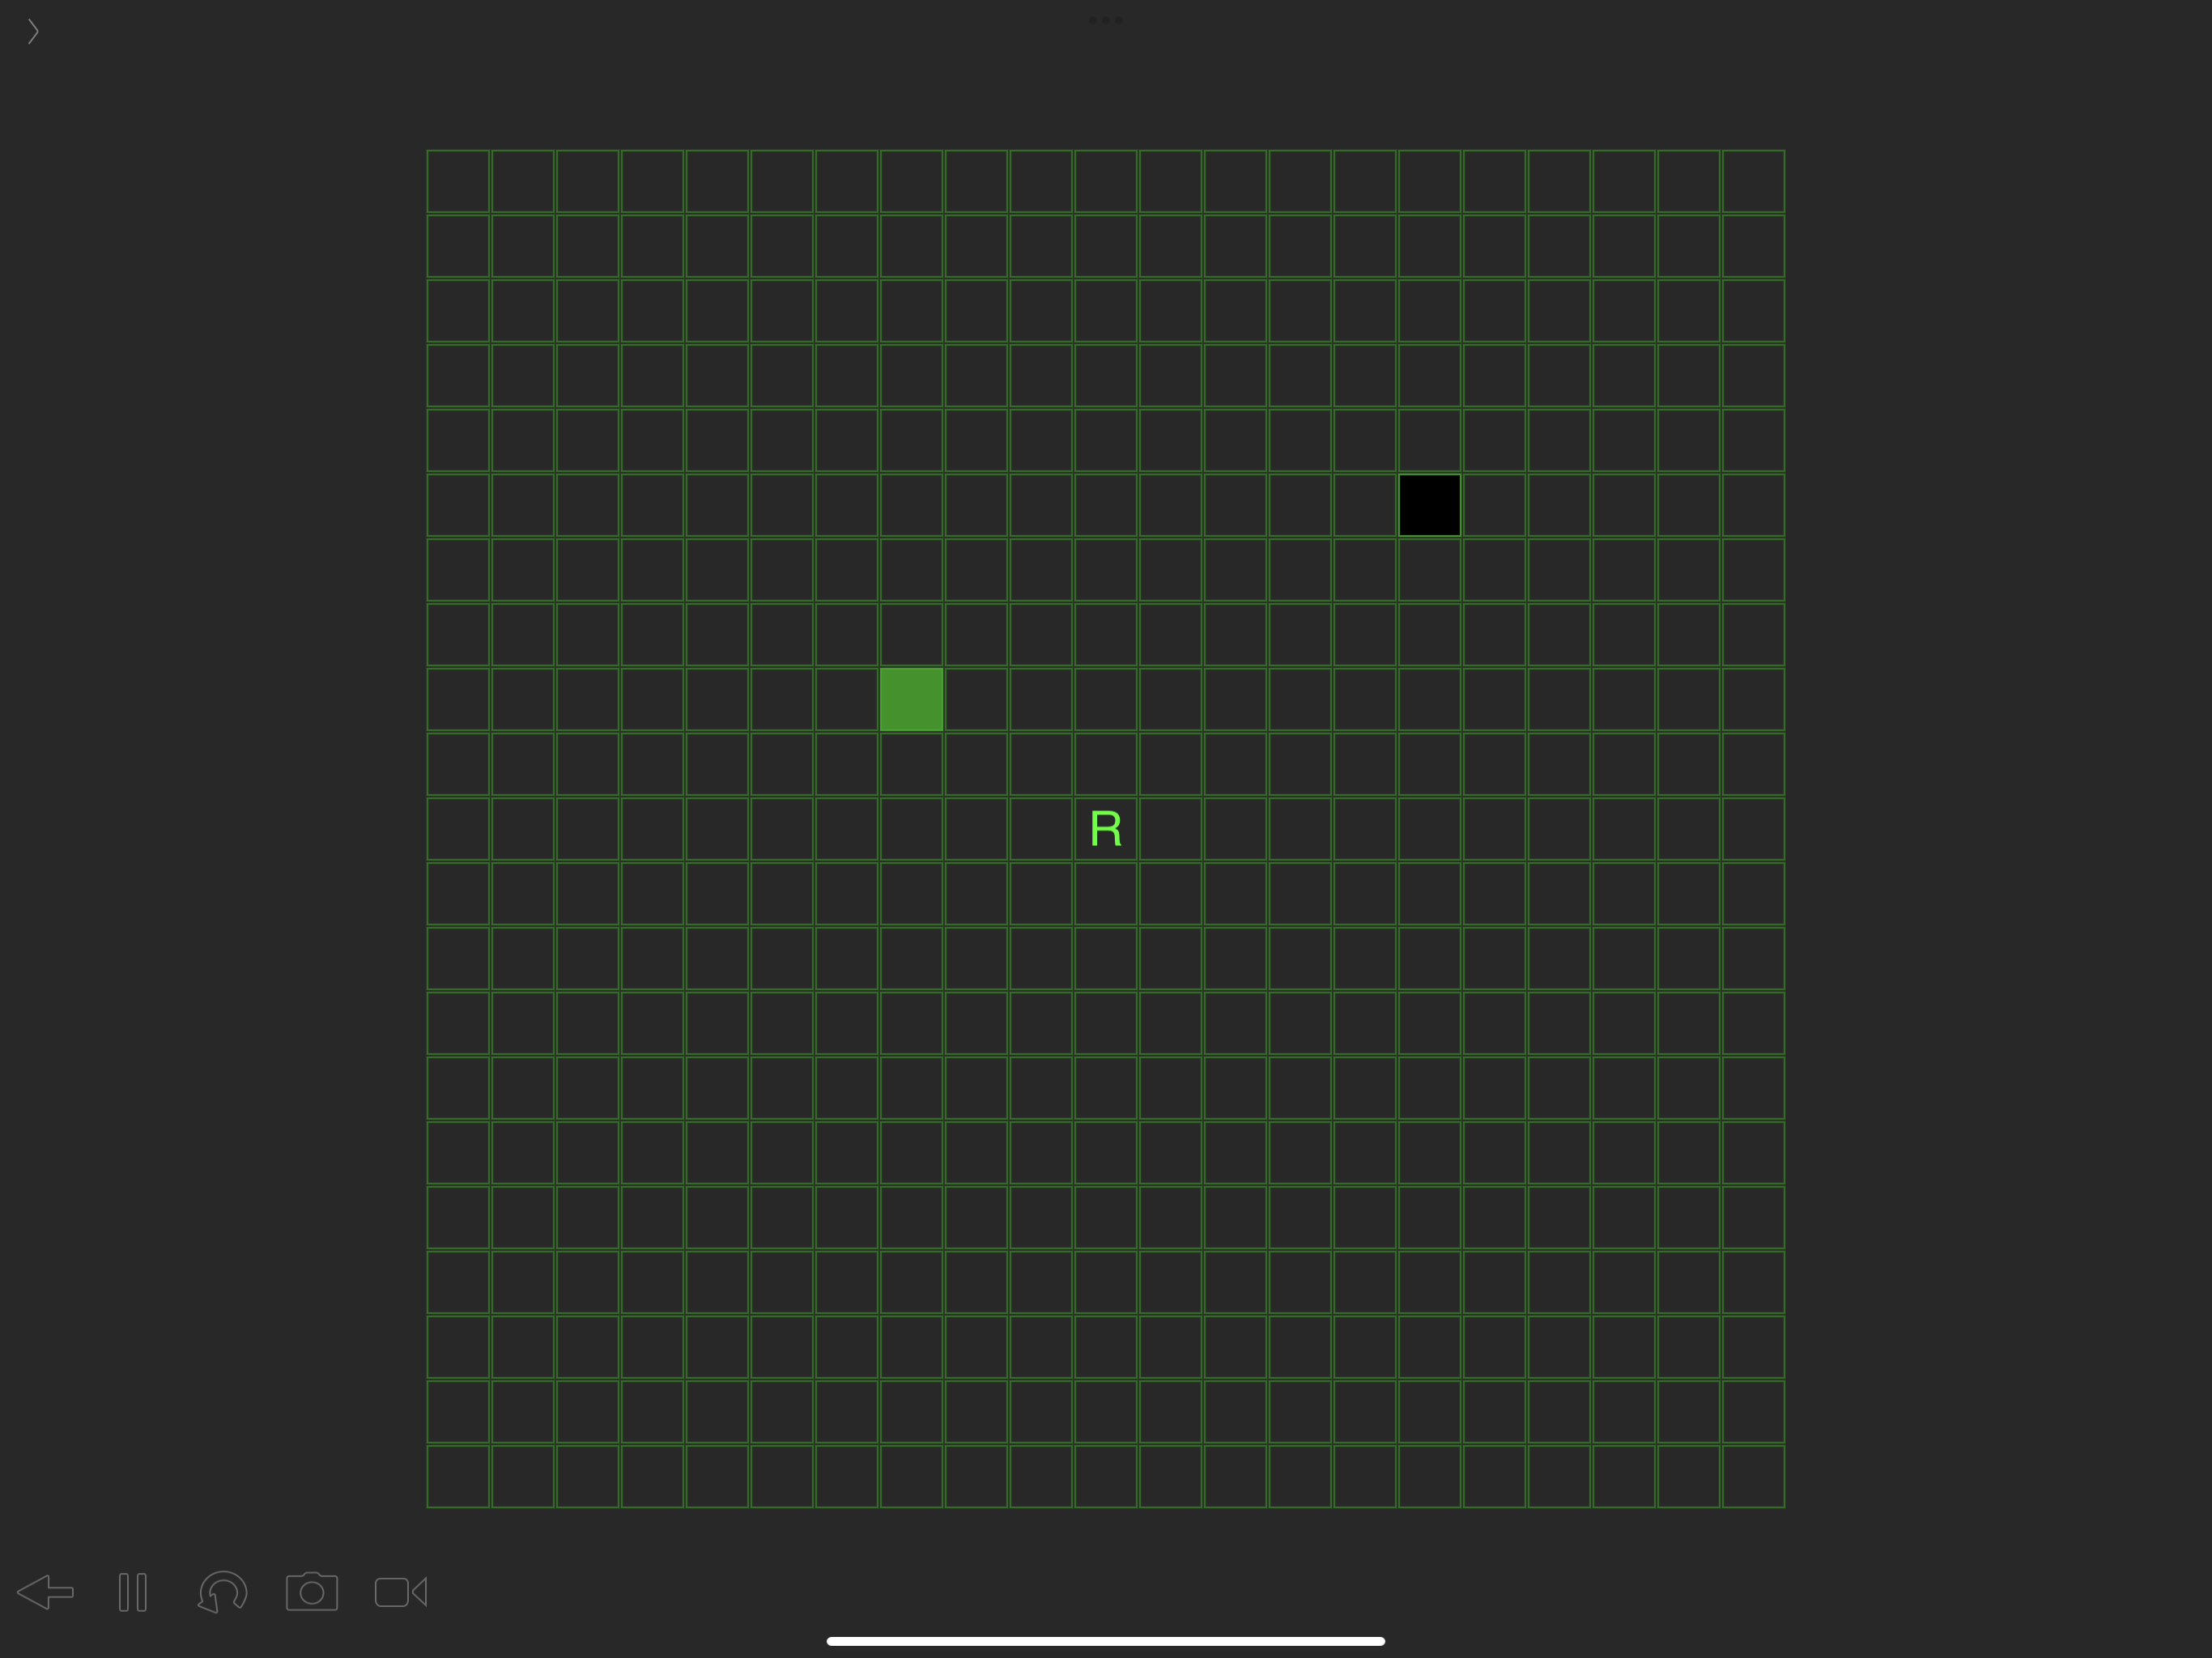 grid showing R in middle, a black square upper right, green square upper left